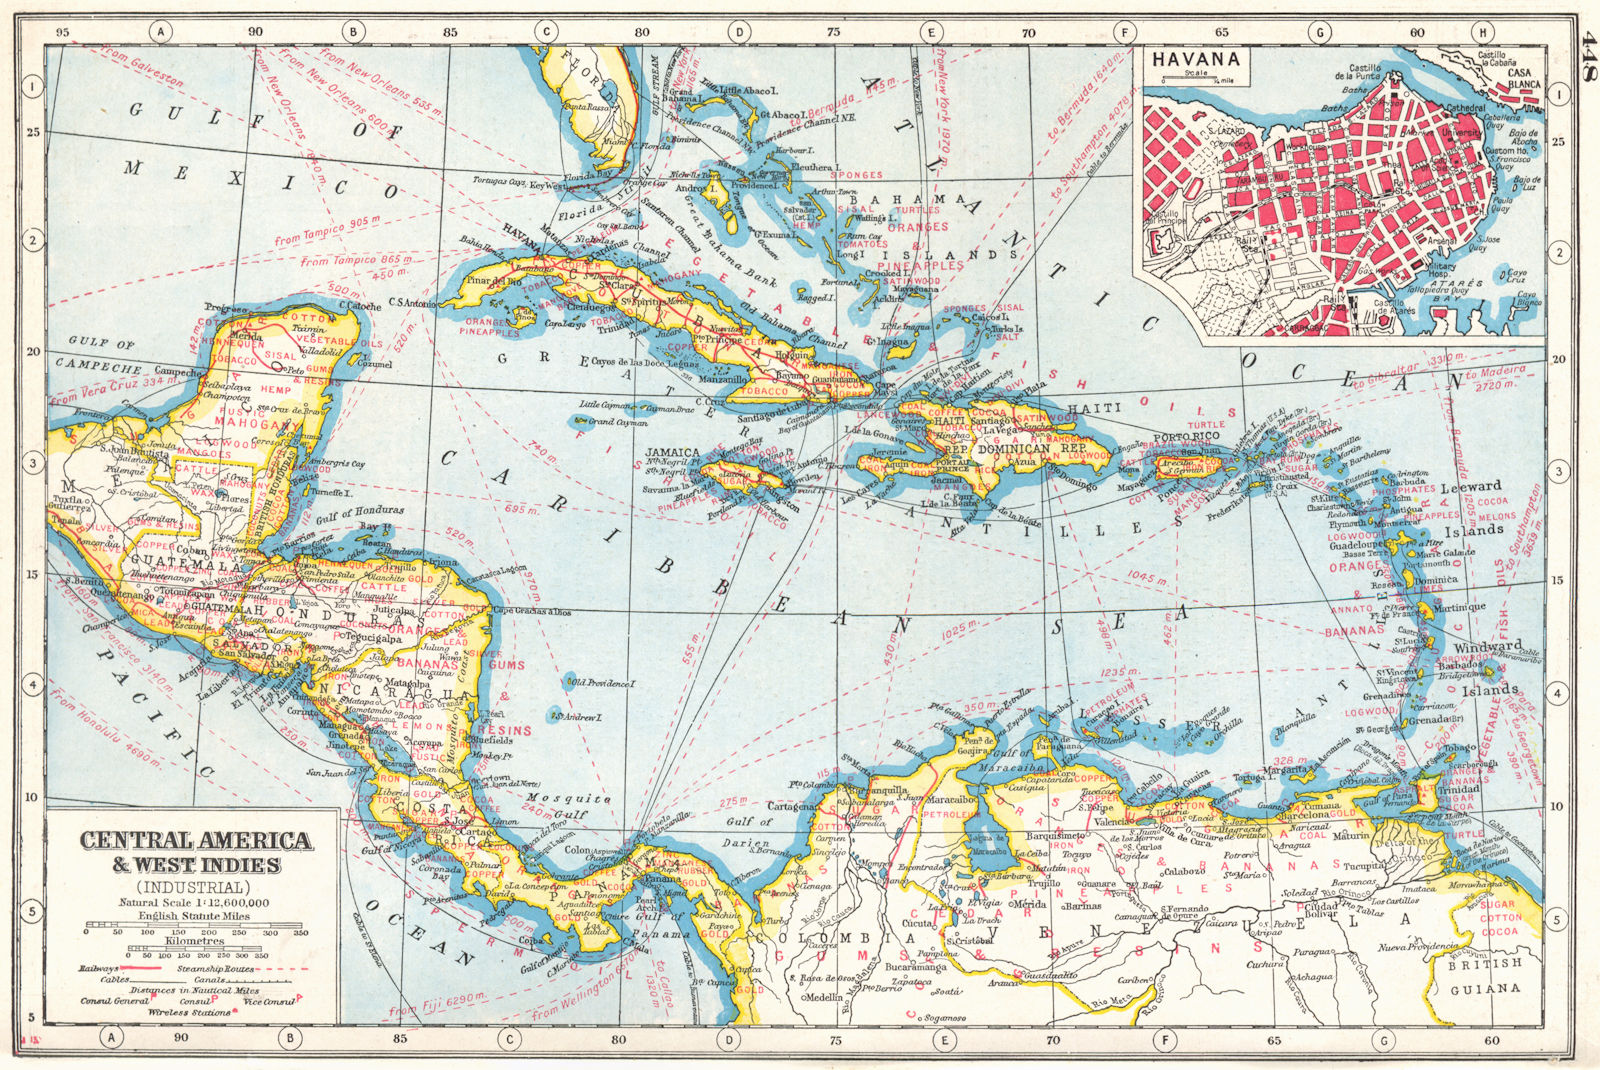 CENTRAL AMERICA/WEST INDIES COMMERCIAL. Agricultural products. Havana 1920 map